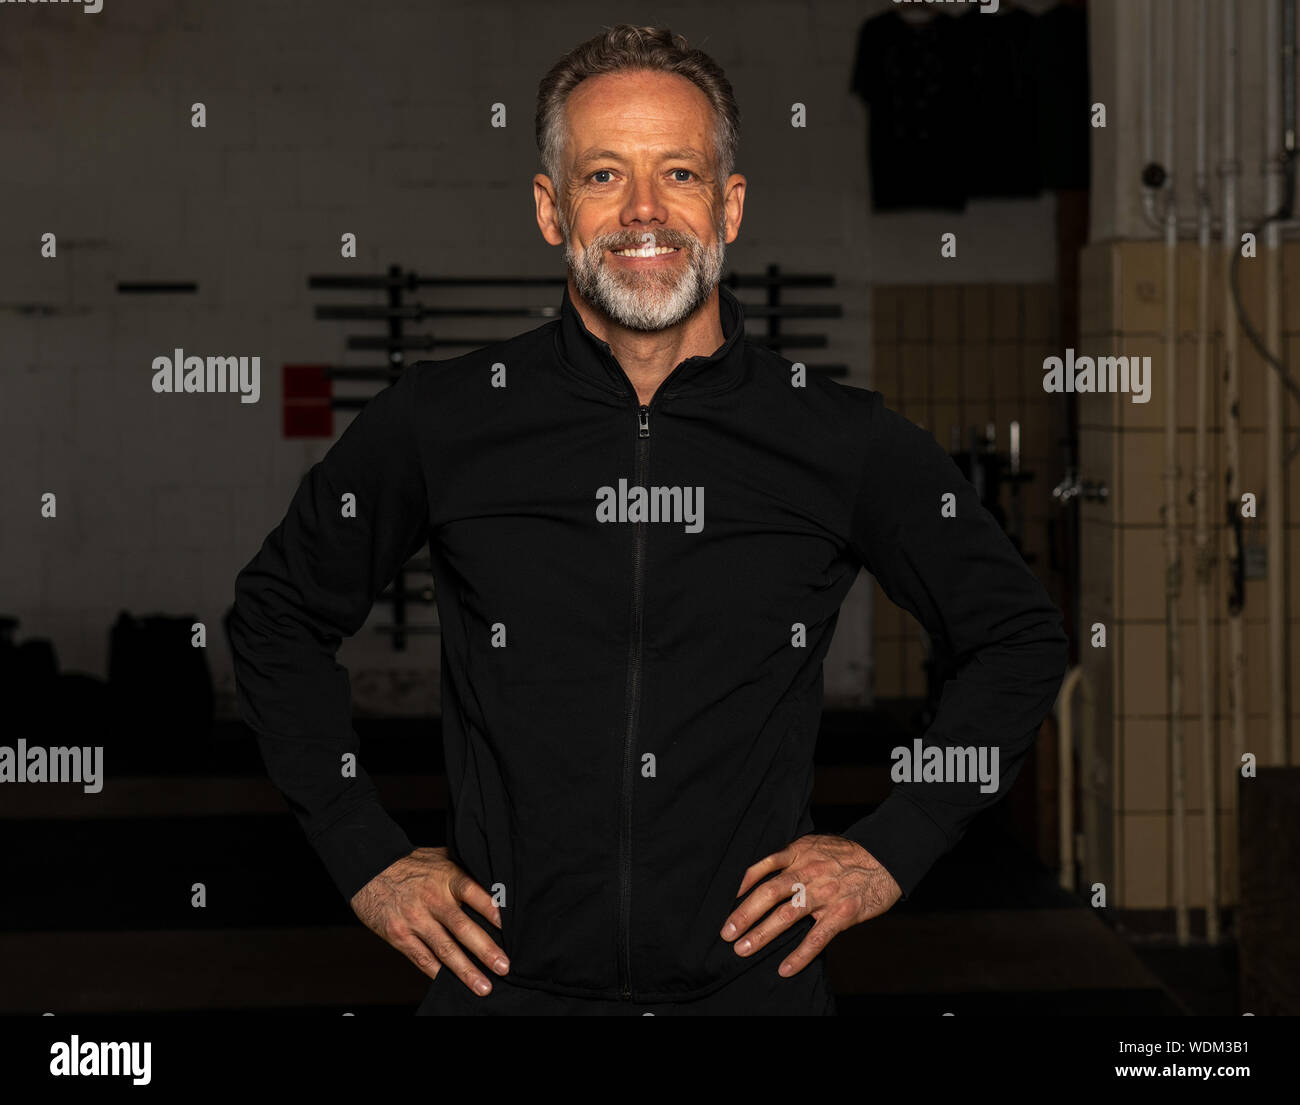 Portrait of an attractive fit middle aged man in a fitness studio. Bearded grey haired man with black sweatshirt jacket is looking into the camera. Stock Photo